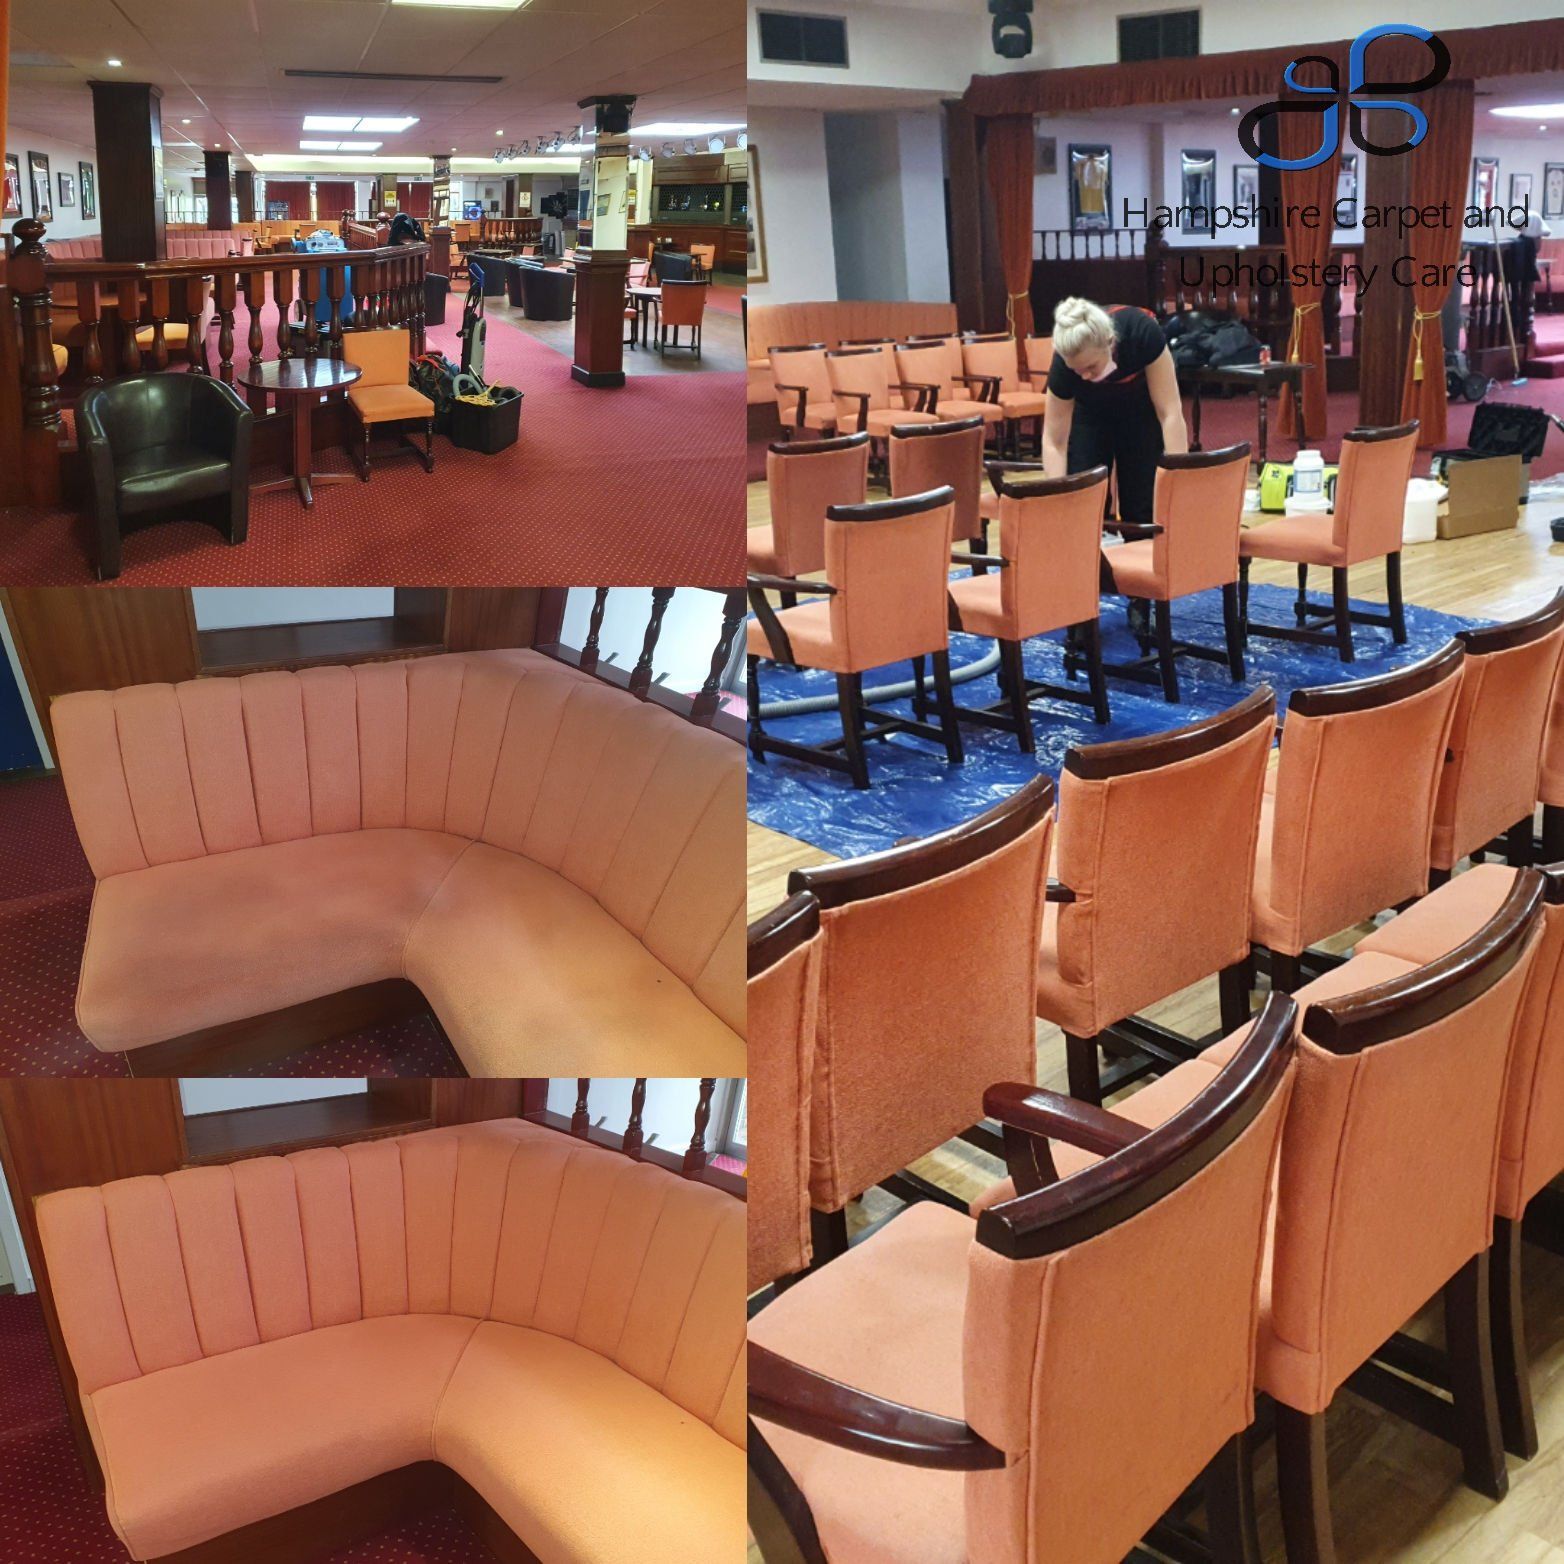 Carpet and Upholstery Deep Cleaning Pub, Restaurant, Bar Hampshire